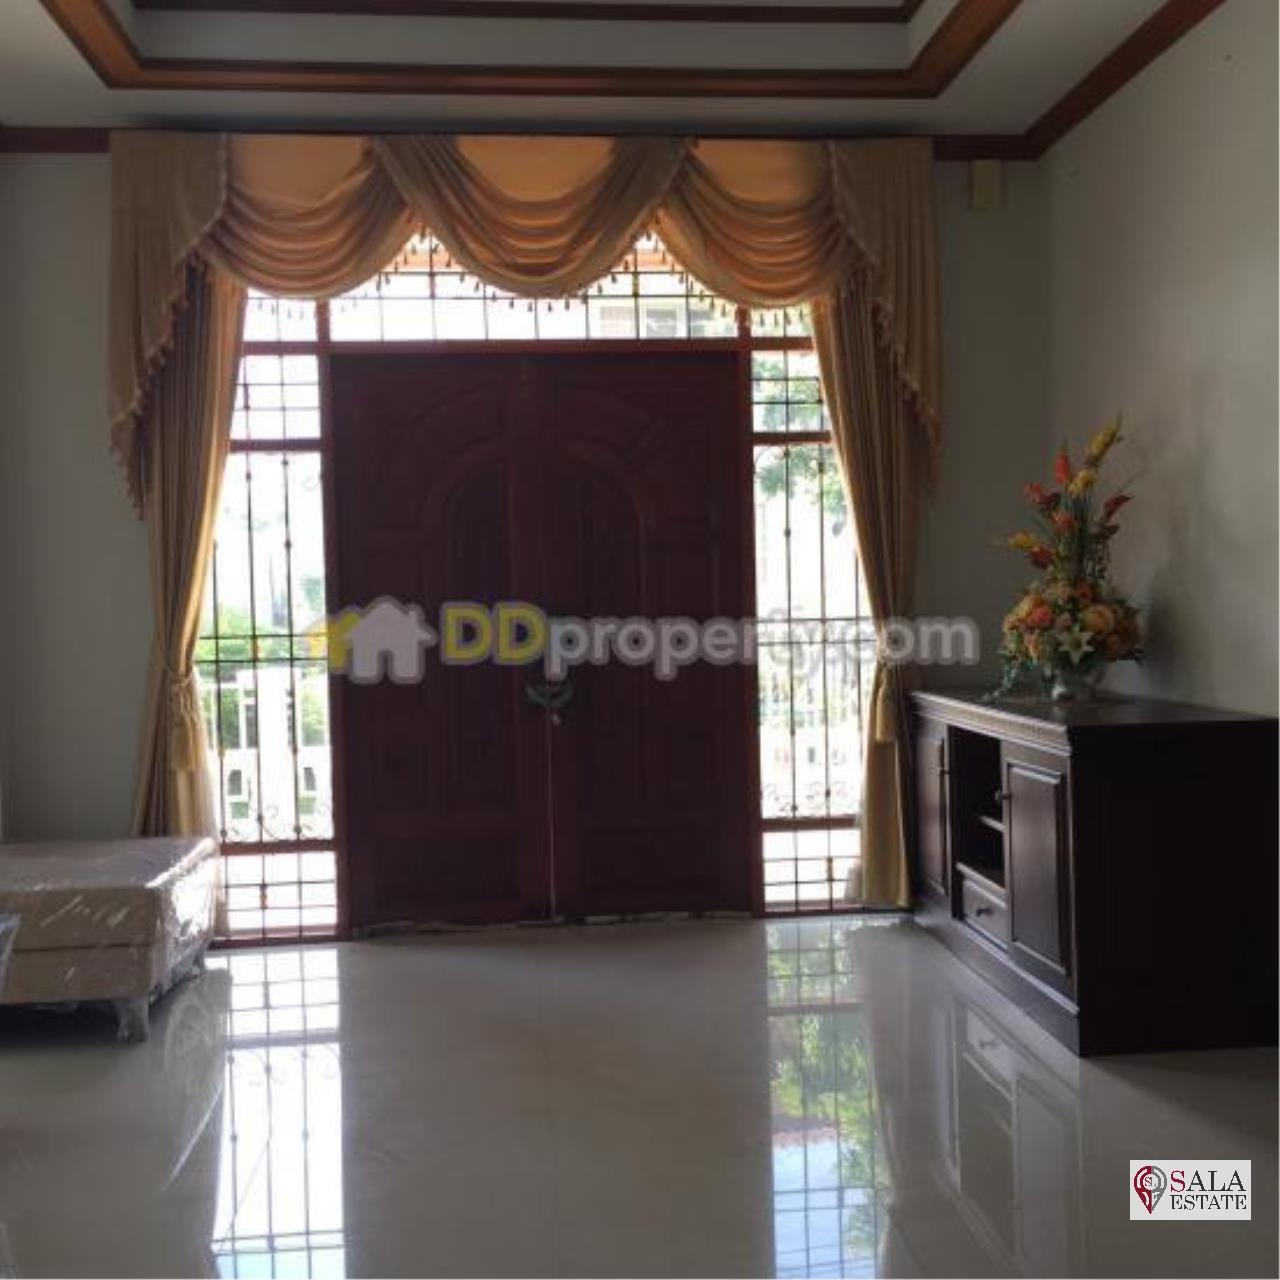 SALA ESTATE Agency's HOUSE FOR SALE - NEAR SUVARNABHUM AIRPORT AND BANG NA -TRAT RD. 4